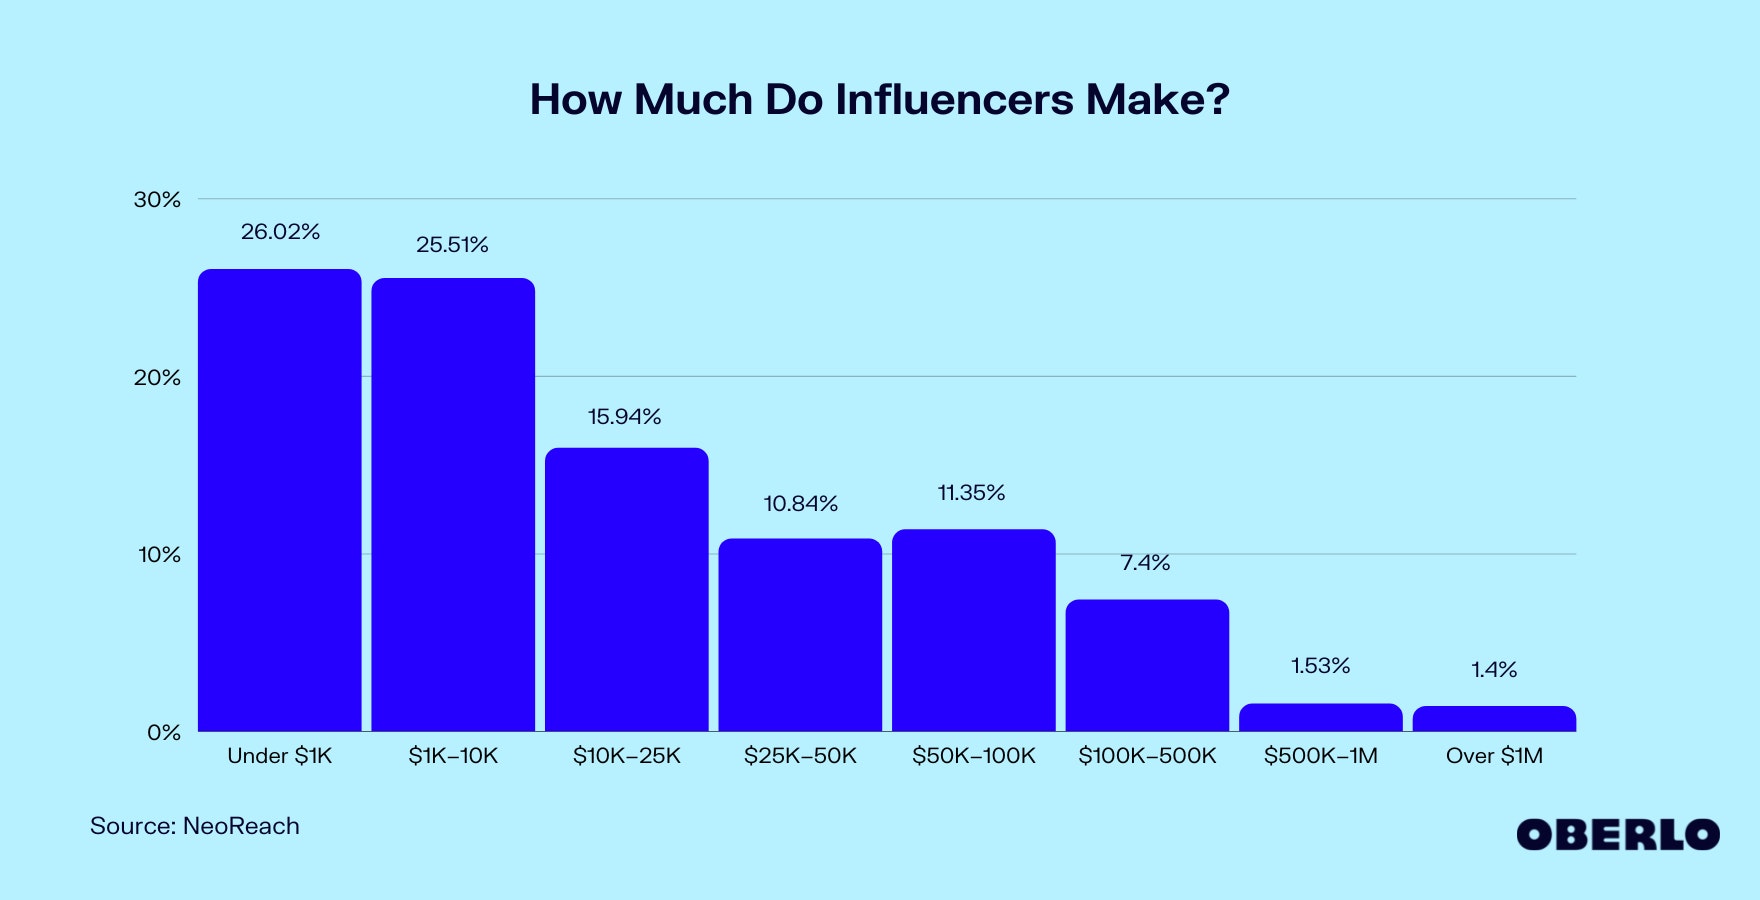 What is the Average Income of an Influencer?